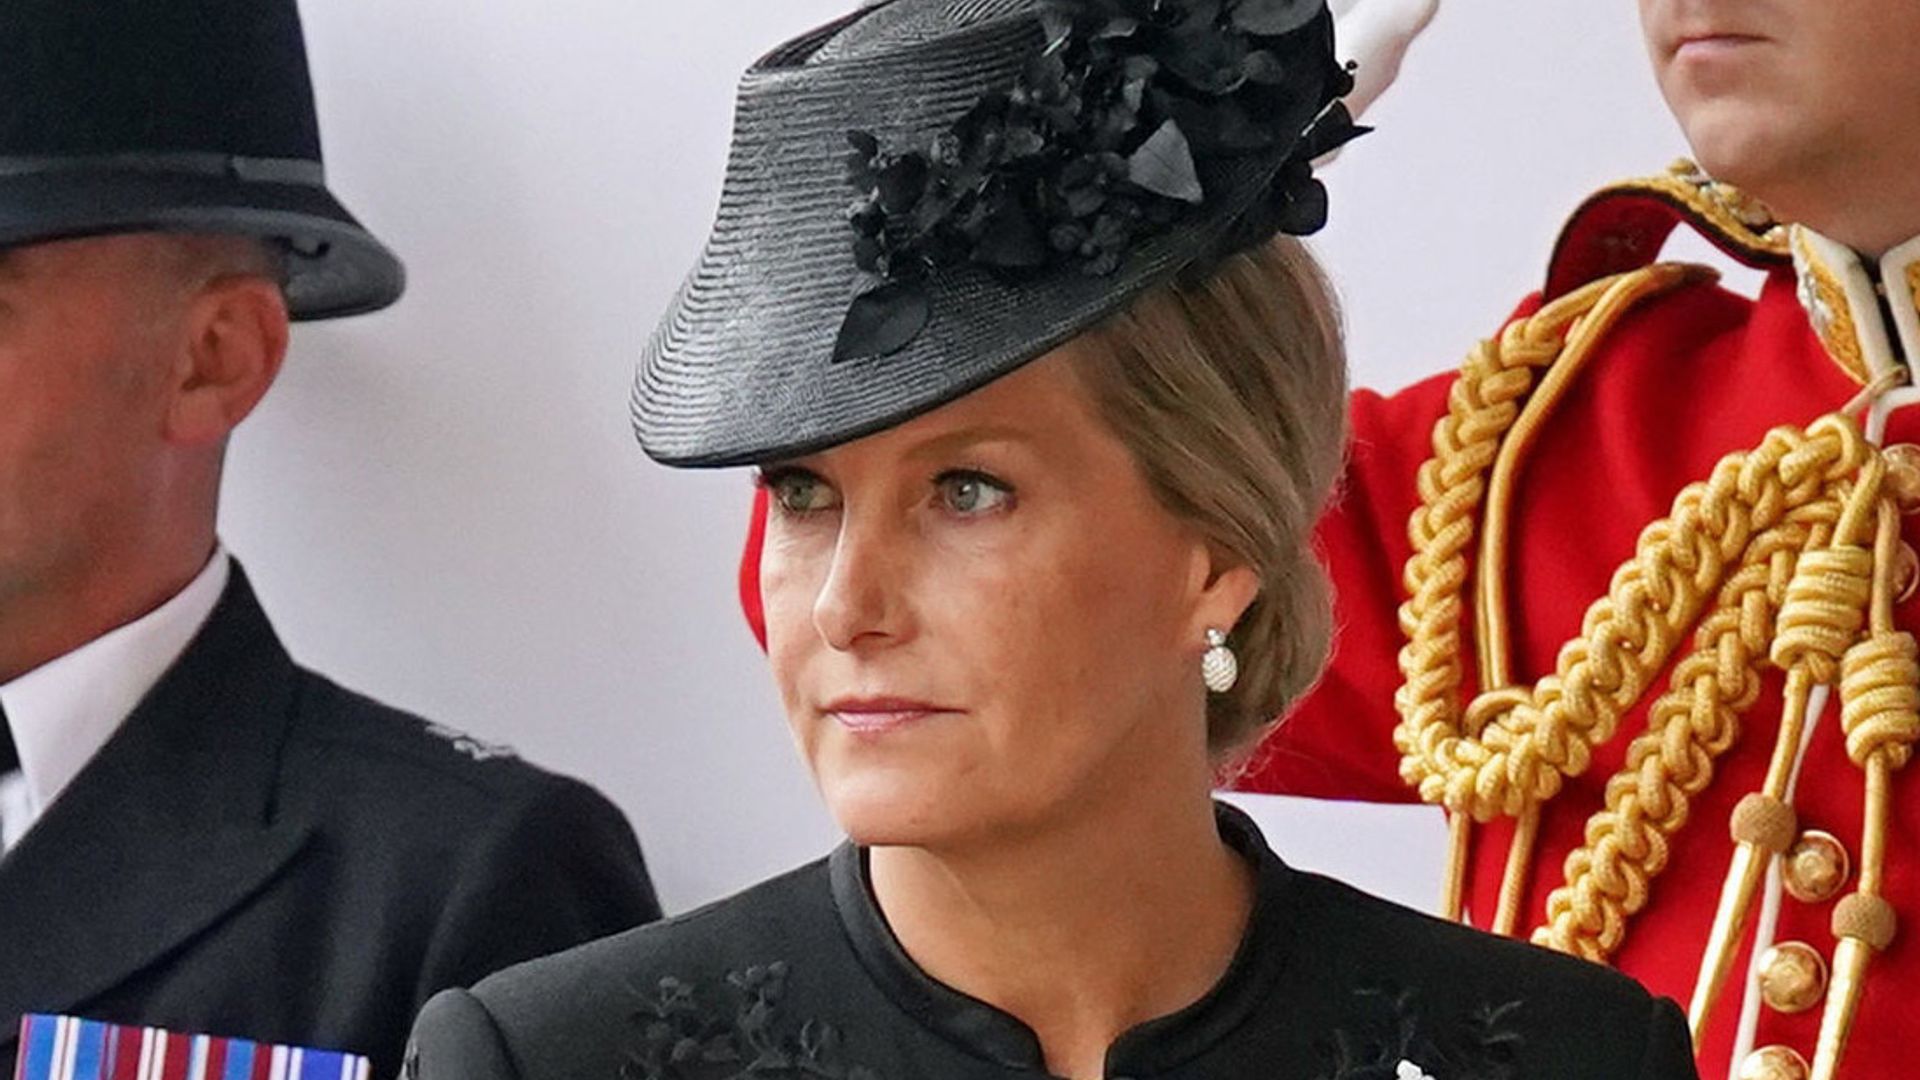 Sophie, The Countess of Wessex arrives at the Committal Service for Queen Elizabeth II held at St George's Chapel in Windsor Castle on September 19, 2022 in Windsor, England. 